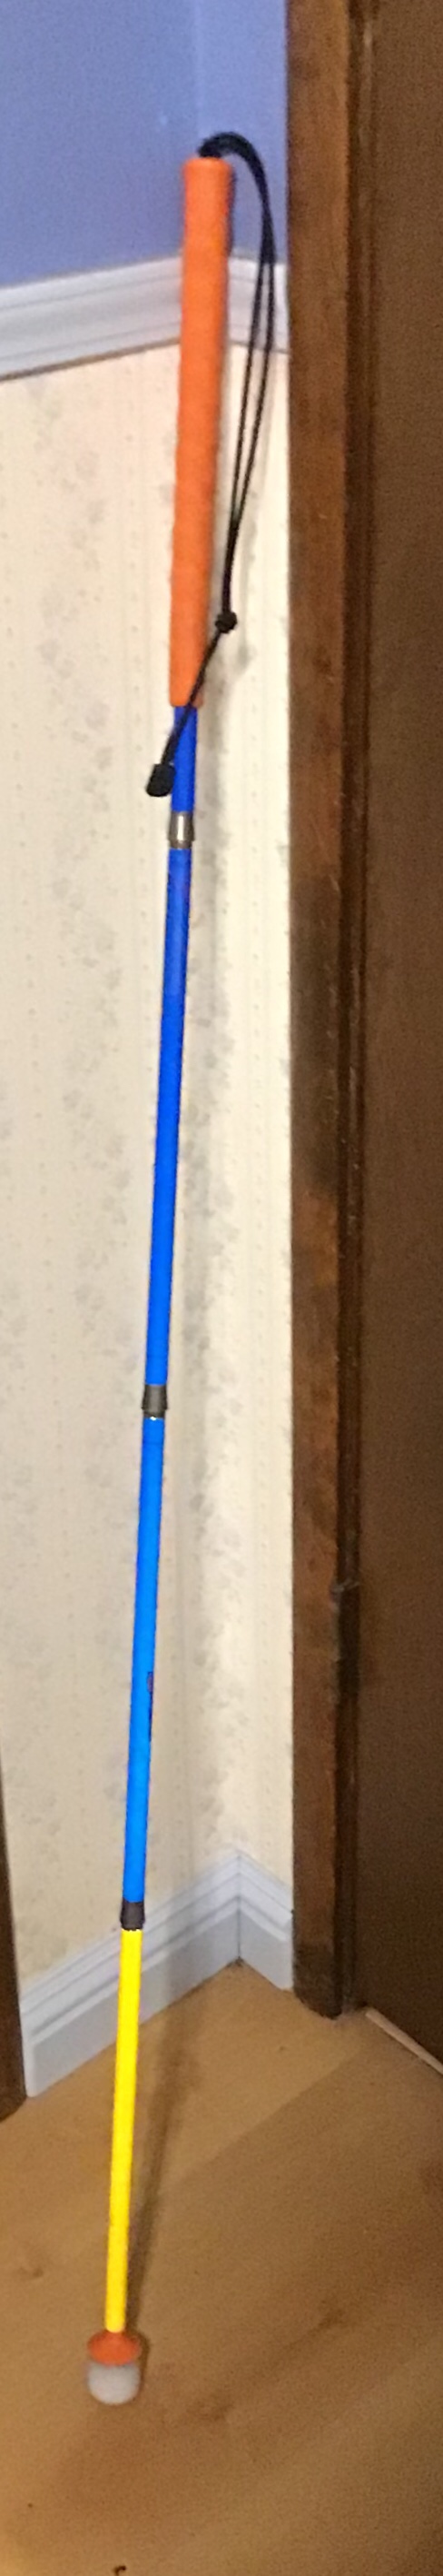 An orange, blue, and yellow cane leaning against a wall that is white on the bottom and blue on the top.